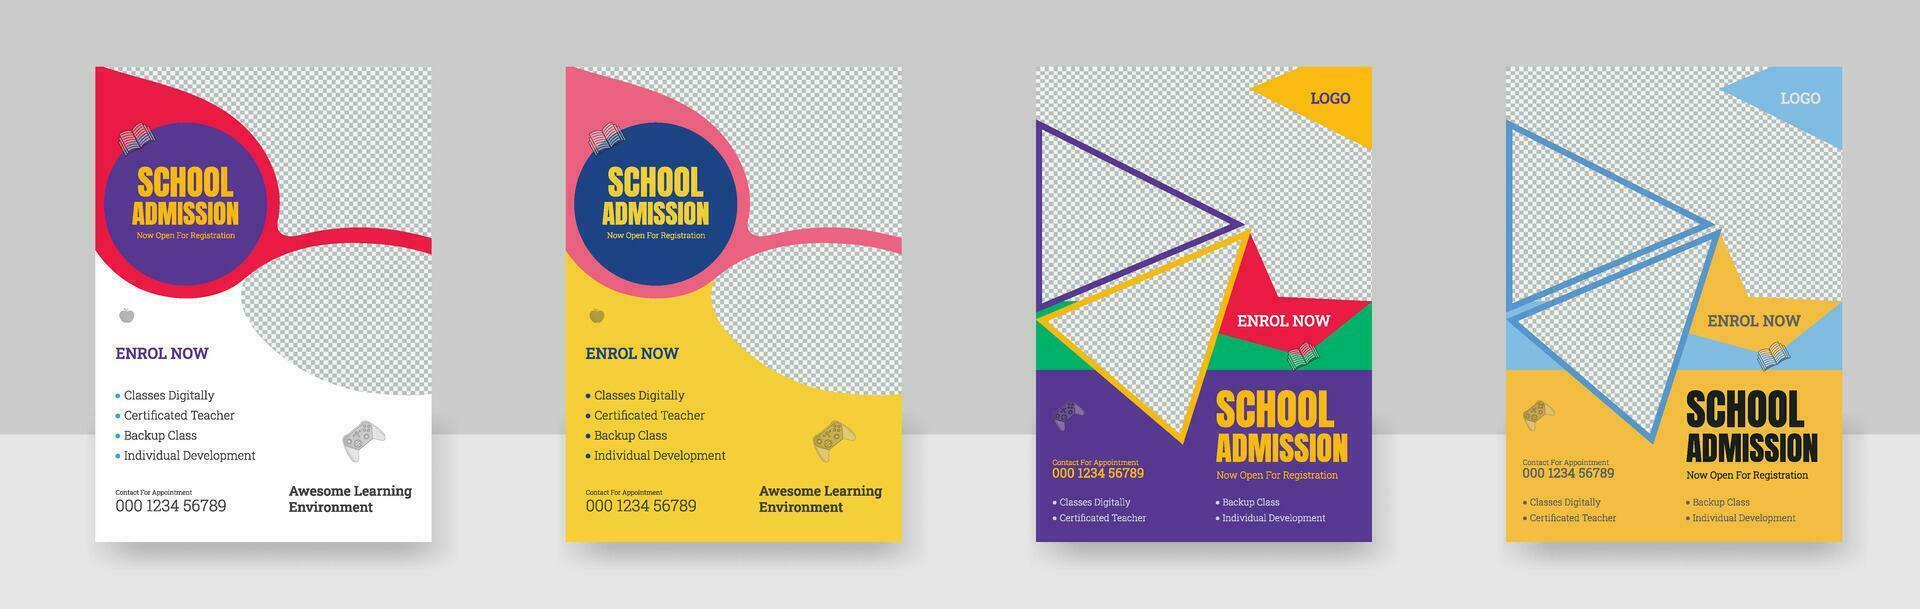 School admission kids education flyer template, Kids back to school education flyer vector